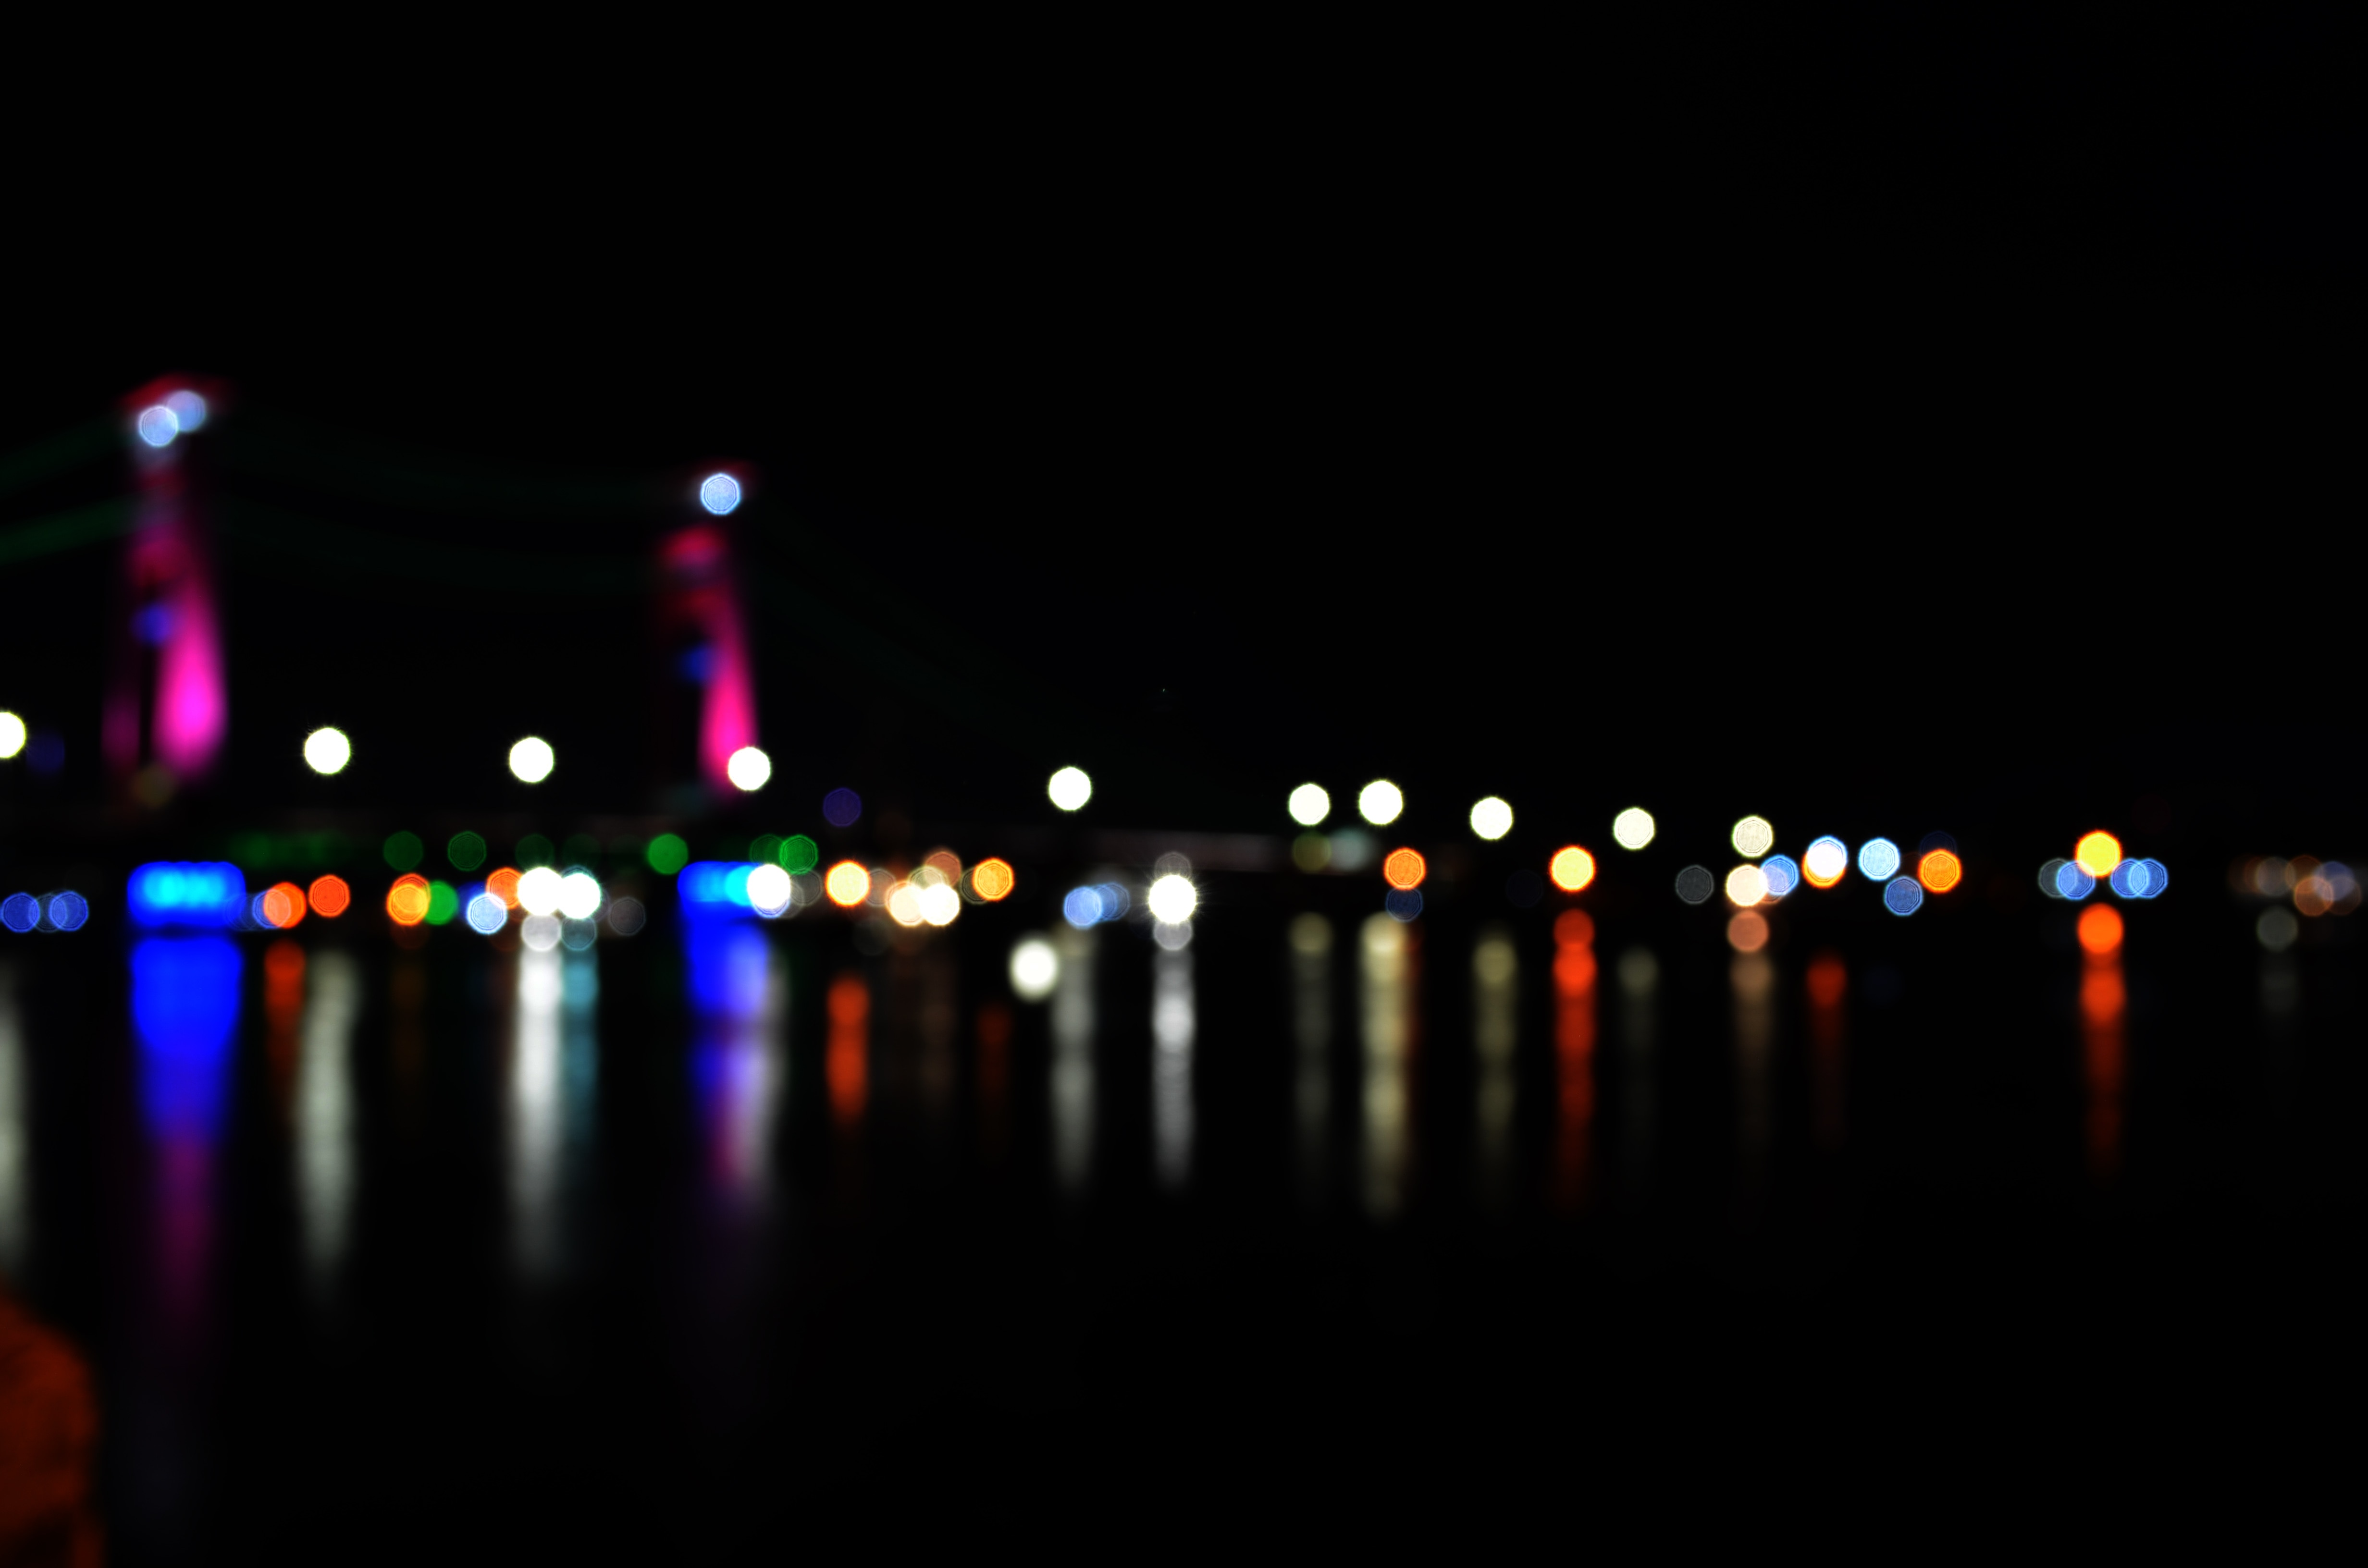 1366x768 Wallpaper City Lights Water Reflections During Night Peakpx